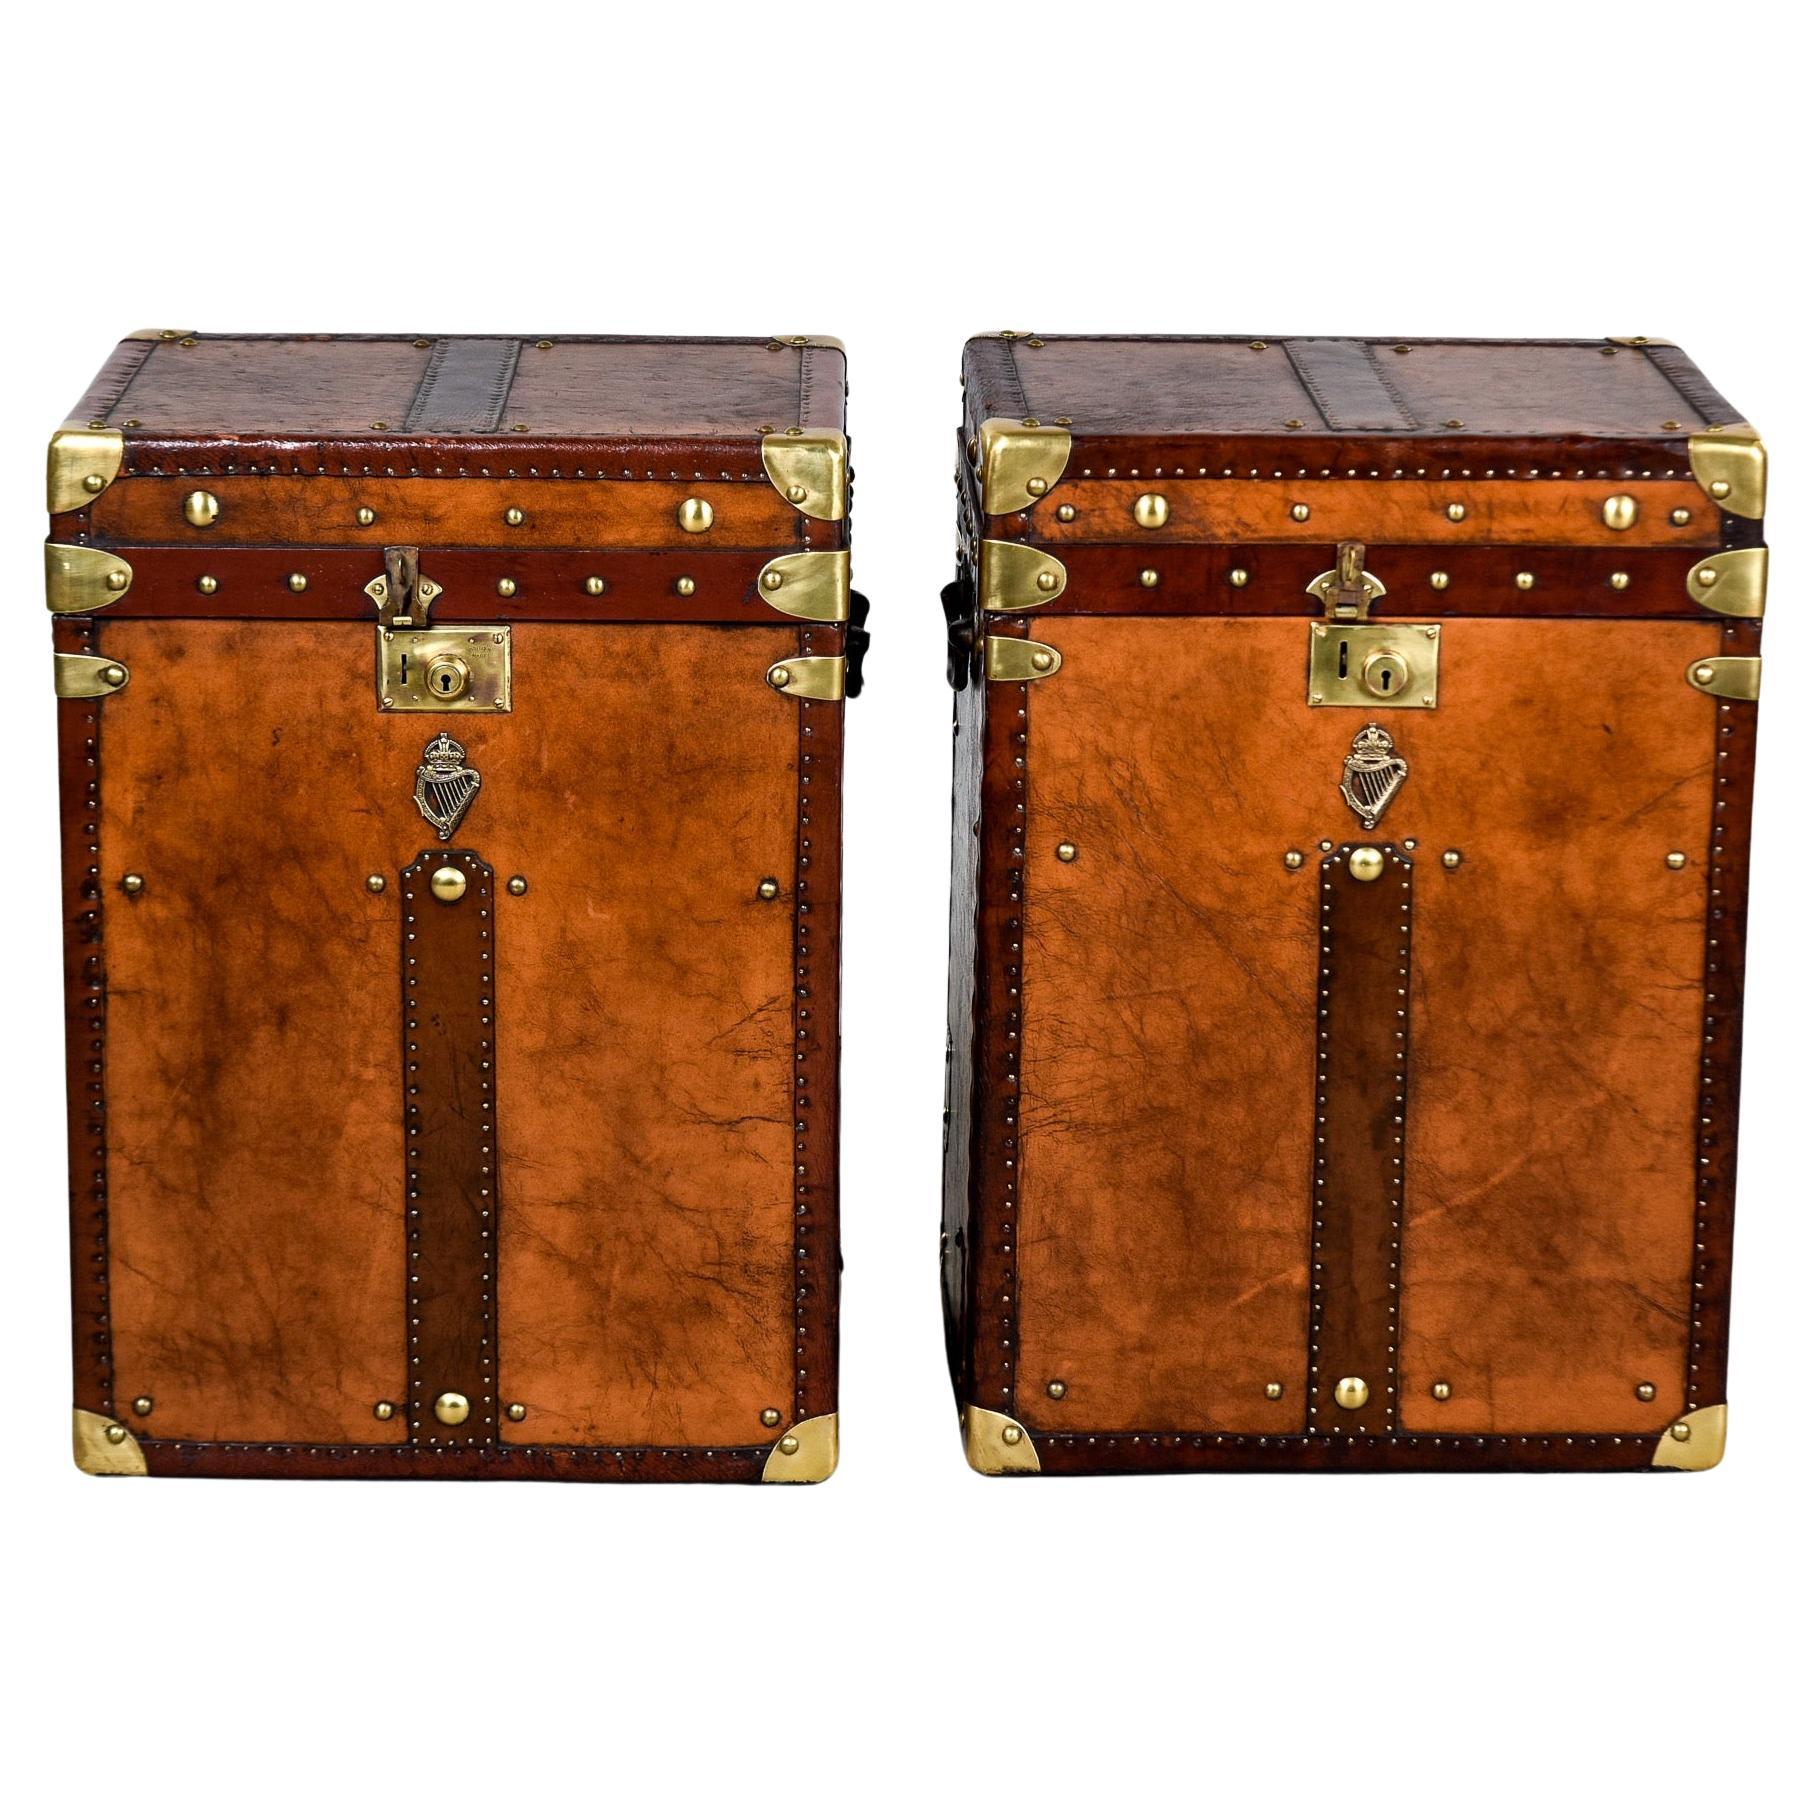 Pair Early 20th C English Regimental Leather Covered Trunks